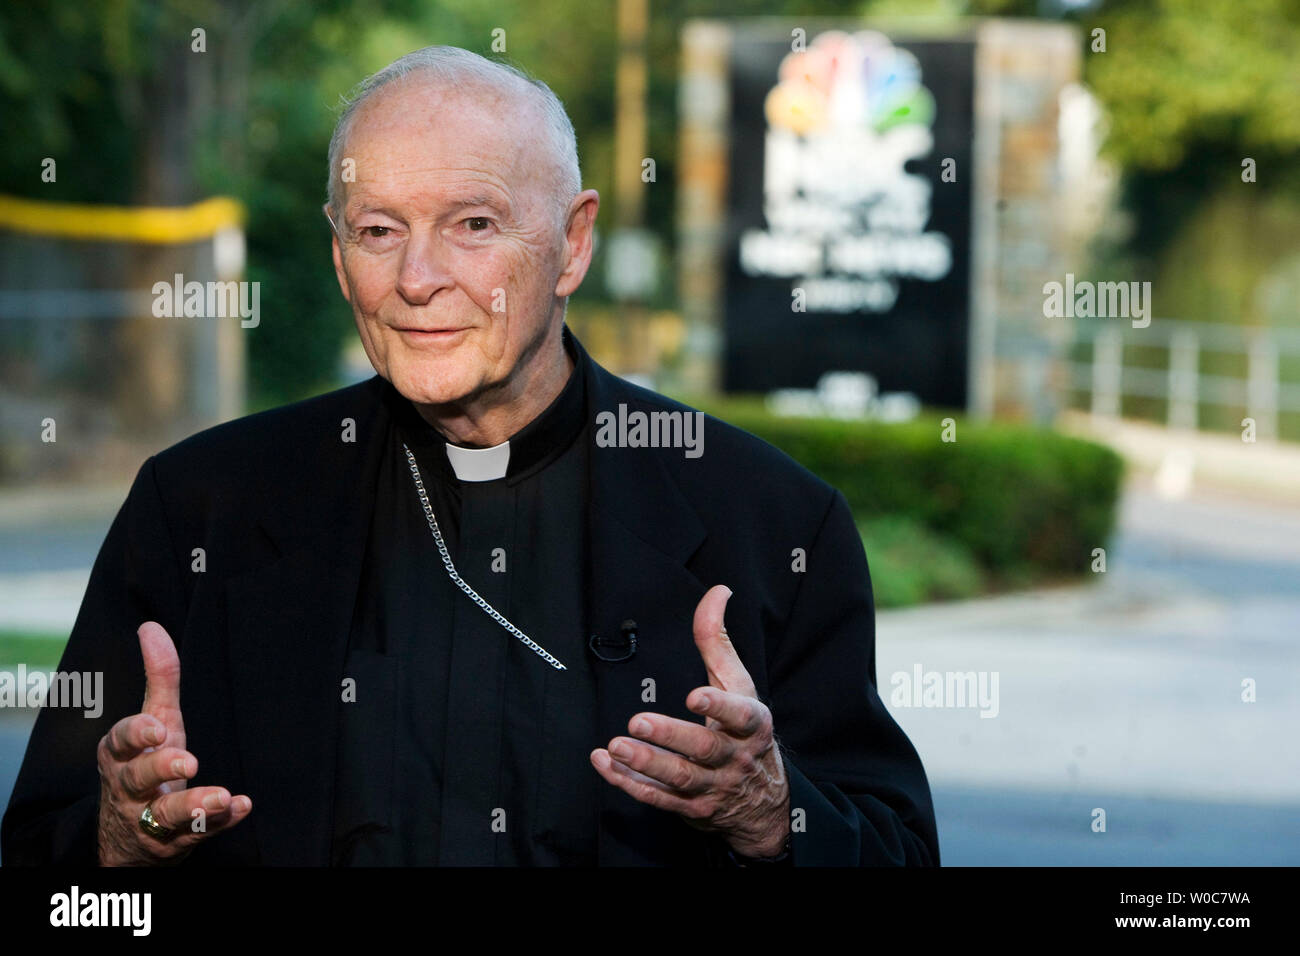 Cardinal Theodore McCarrick, retired Archbishop of Washington, talks at the entrance to NBC Studios in Washington on June 13, 2008. NBC Political Correspondent Tim Russert died of an apparent heart attack while working at this NBC News Bureau in Washington on Friday. Tim Russert was the host of 'Meet the Press,' and NBC's Washington bureau chief. He was 58. (UPI Photo/Patrick D. McDermott) Stock Photo